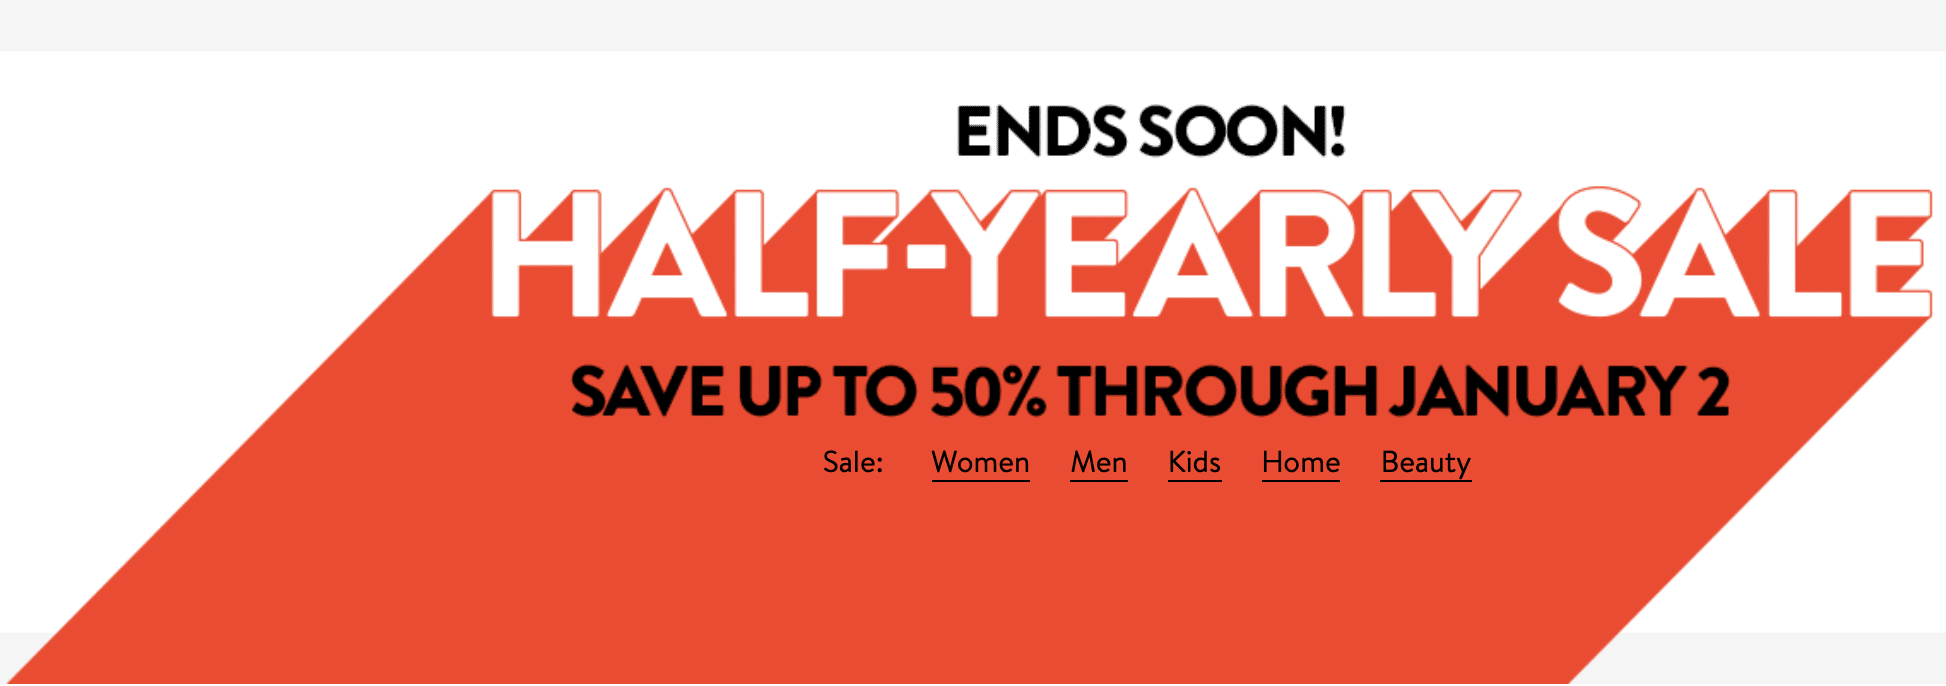 Nordstrom Half-yearly sale